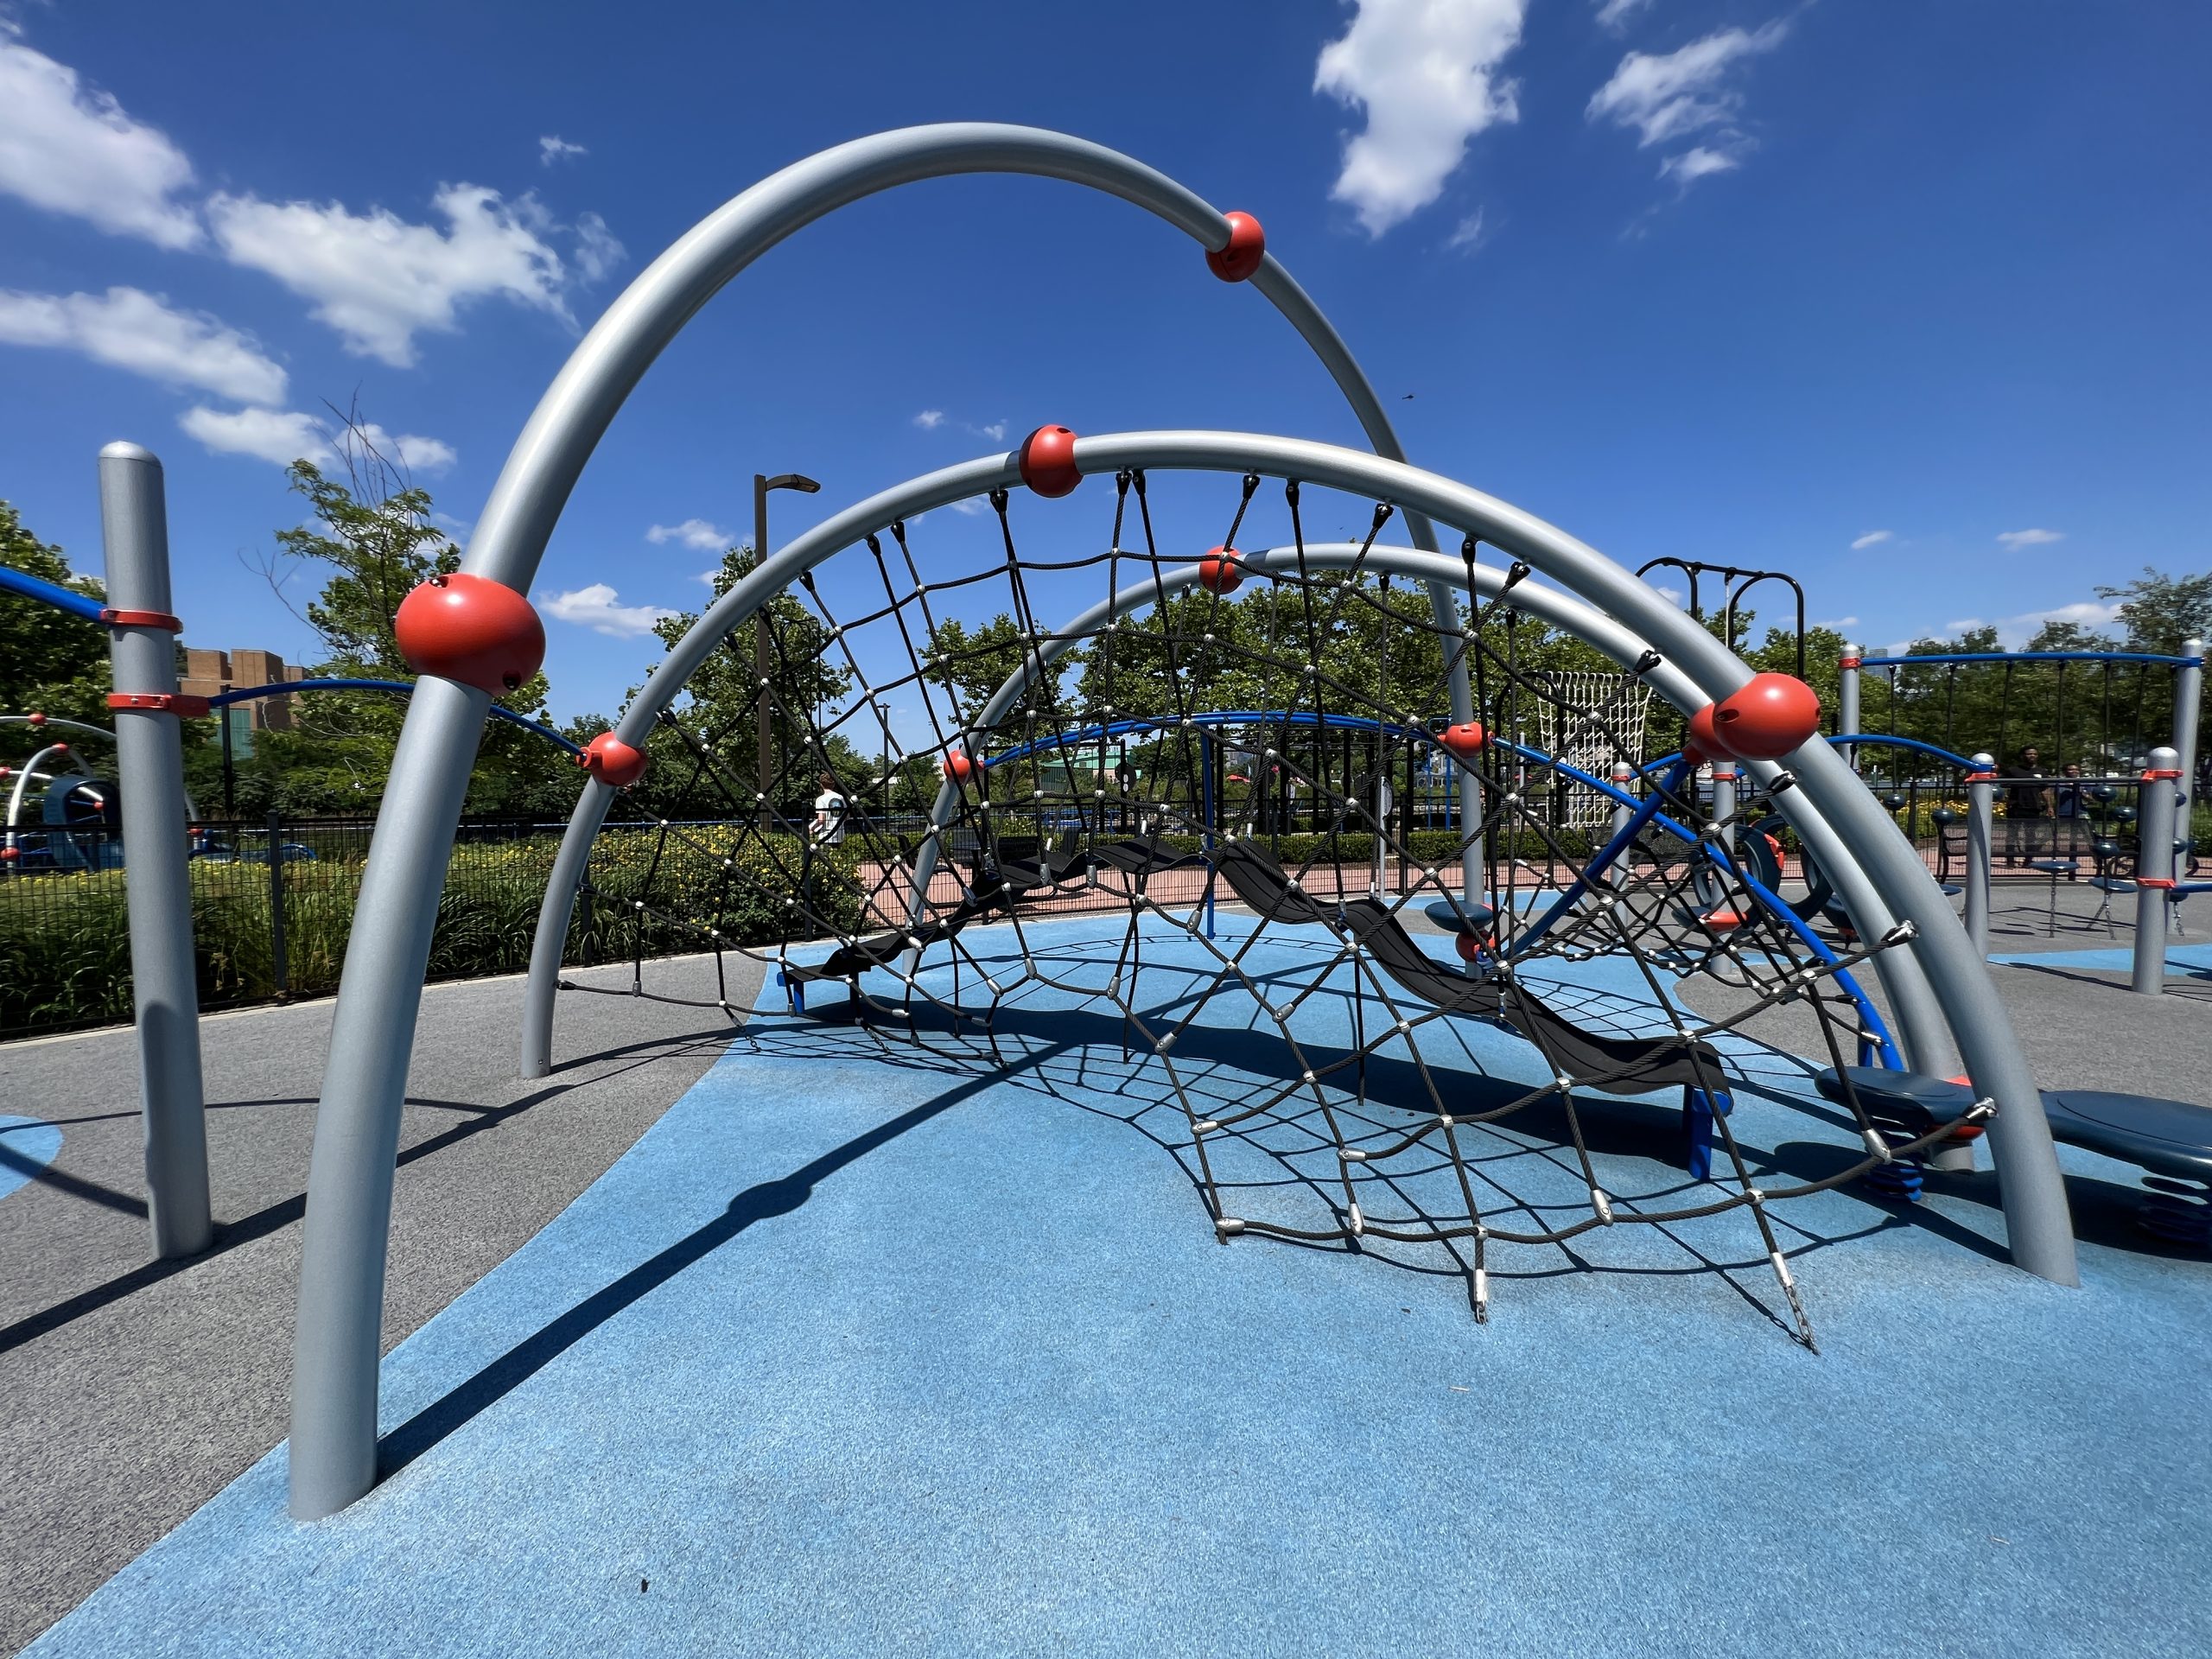 Field of Dreams Park Playground in West Deptford NJ (with Photos)